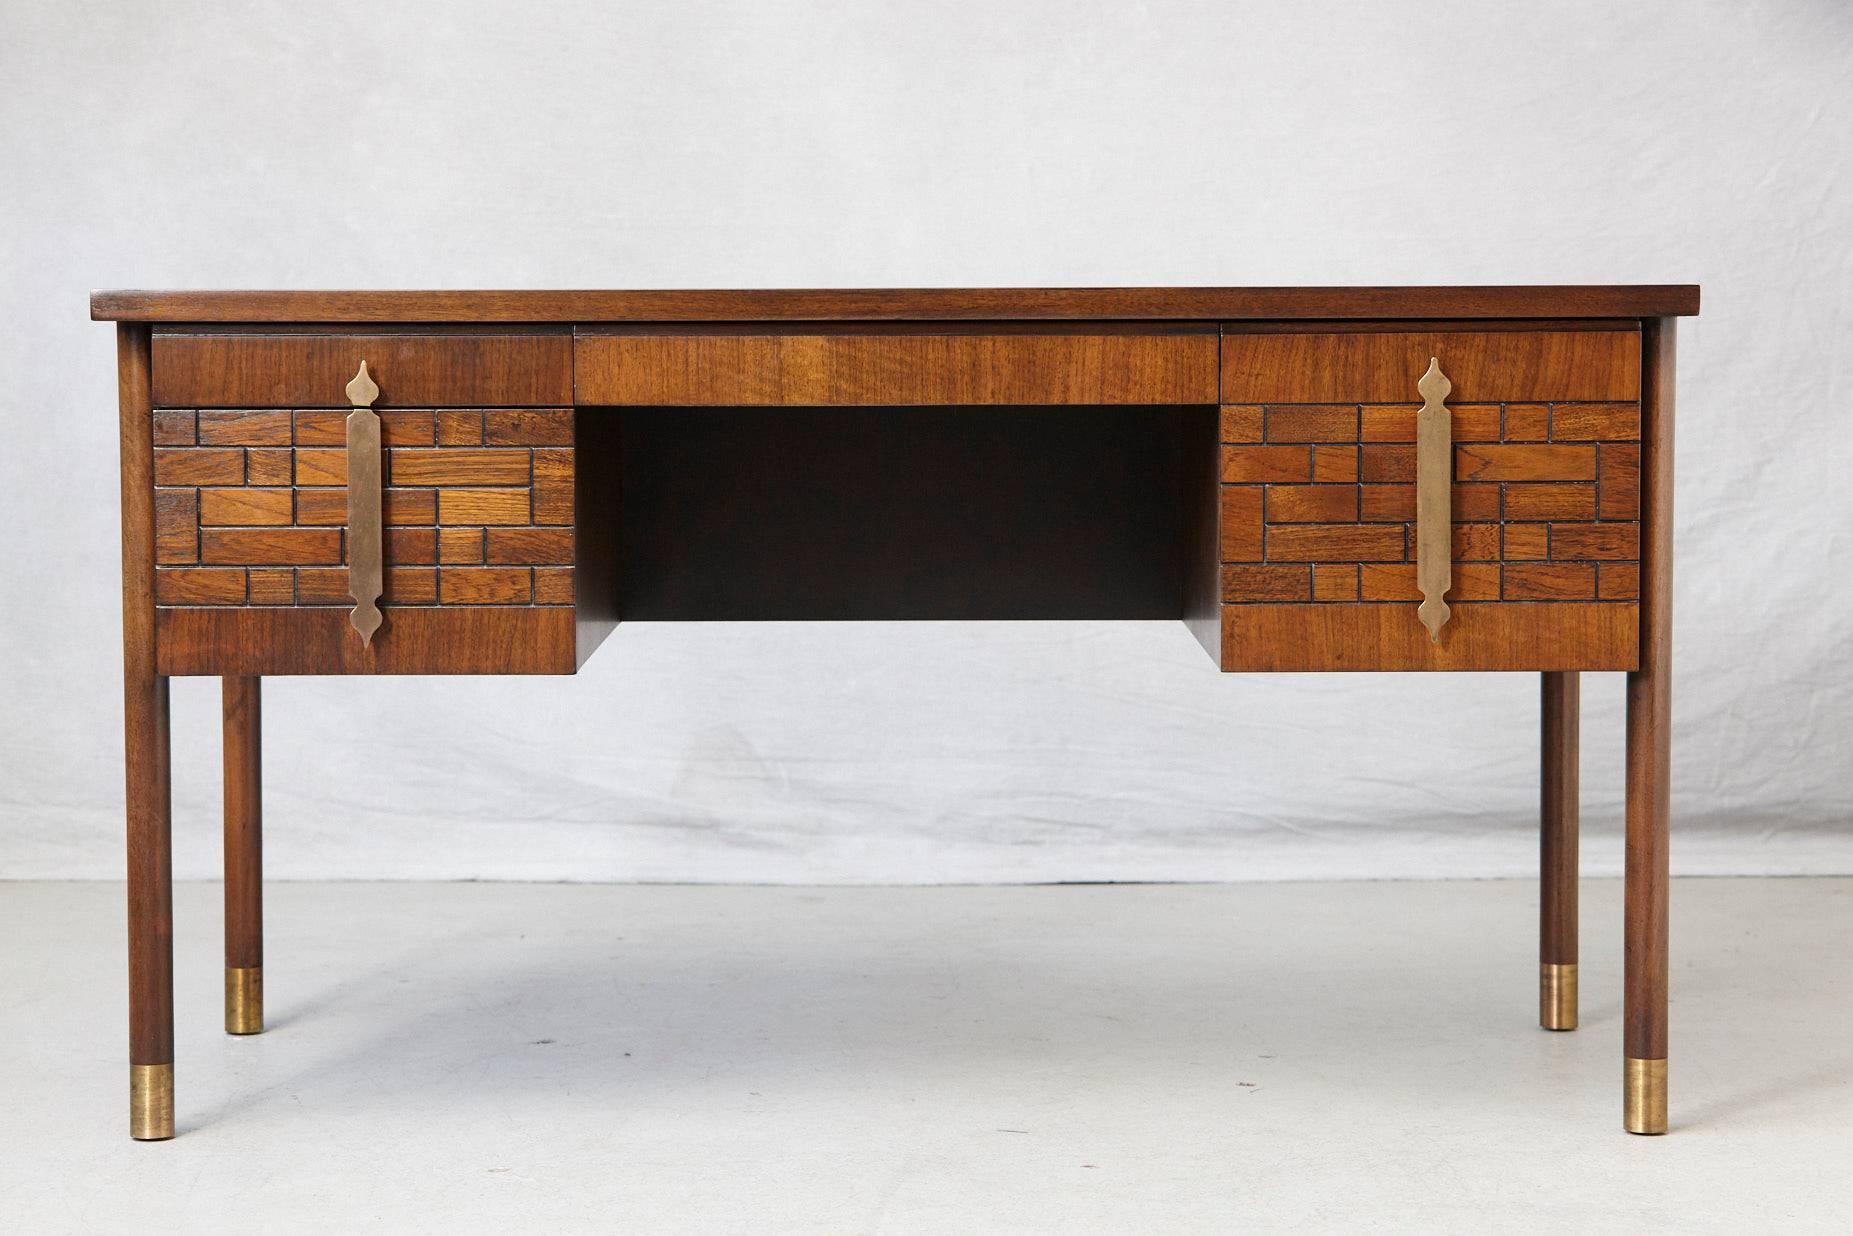 Impressive walnut desk with four drawers, graphic wood work on the drawers, wood inlays on the top and brass hardware, mounted on round legs with brass leg tips. Quality wood construction in excellent condition, circa 1970s.
Height from the floor